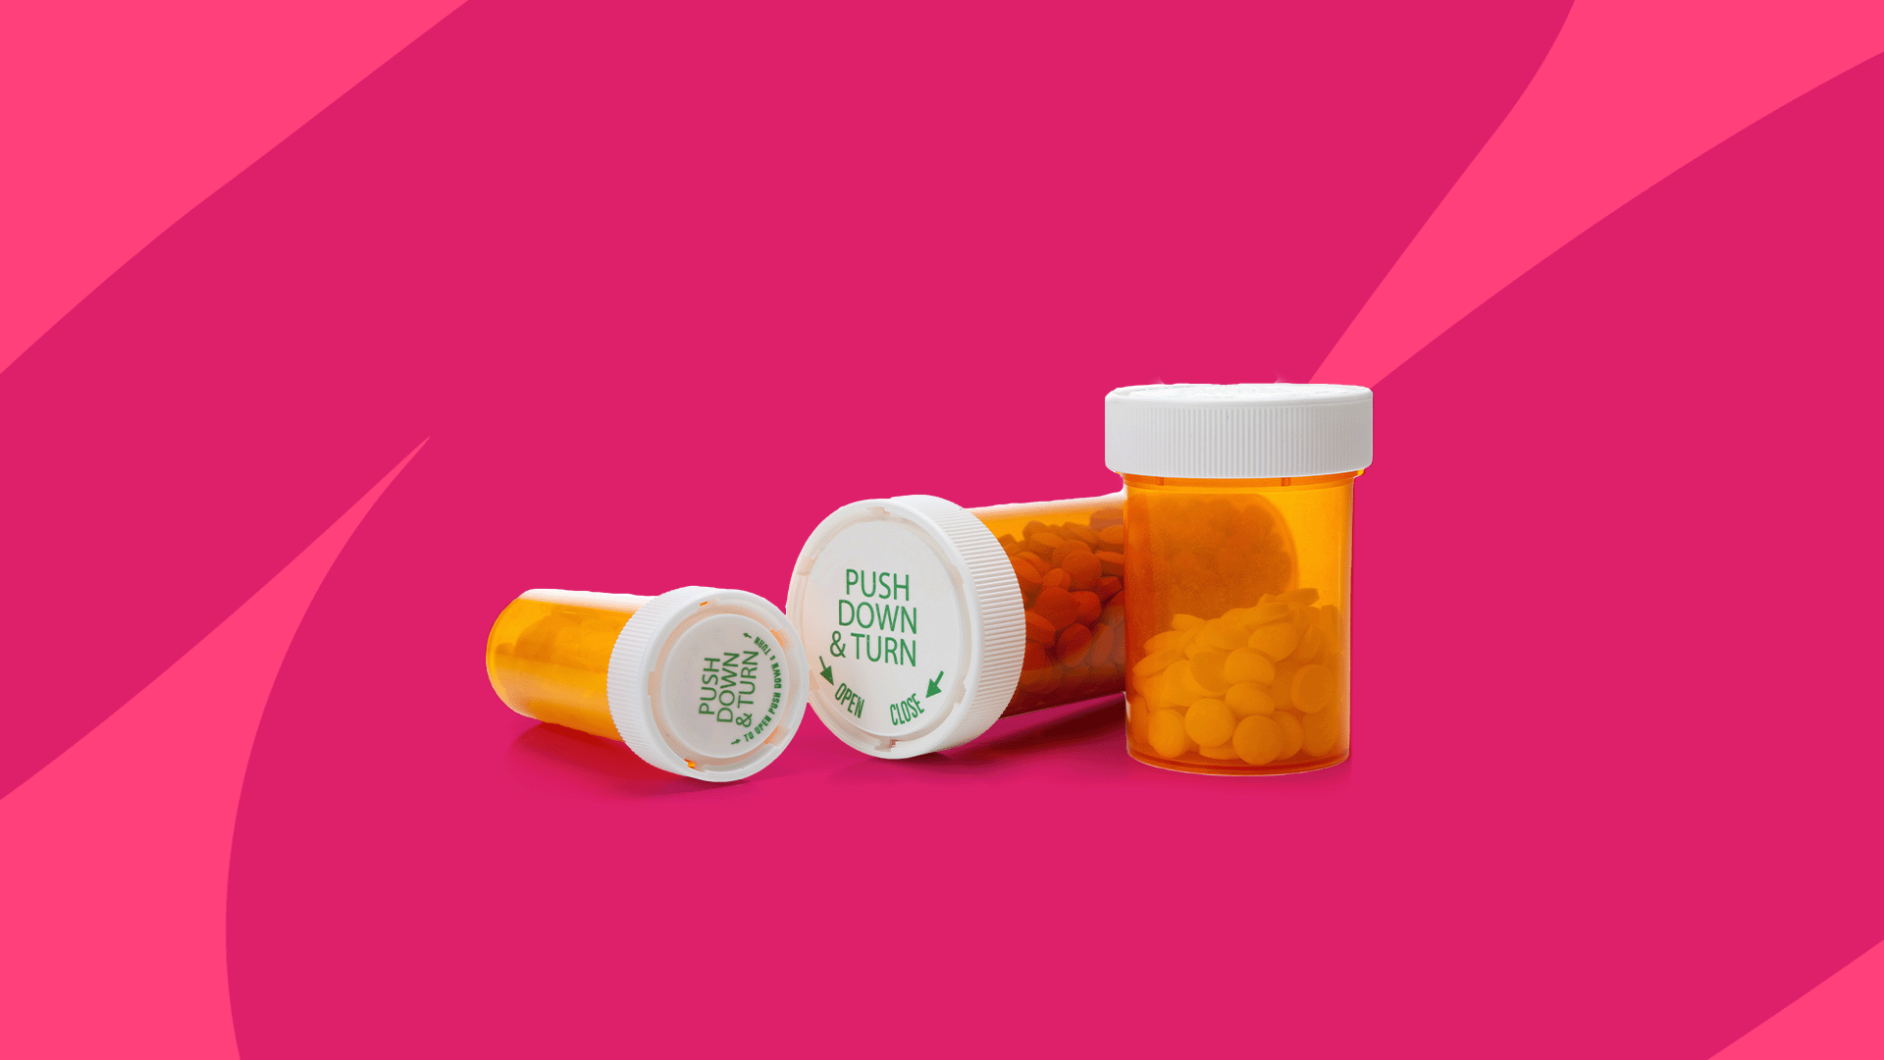 Rx pill bottles: How much is famotidine without insurance?